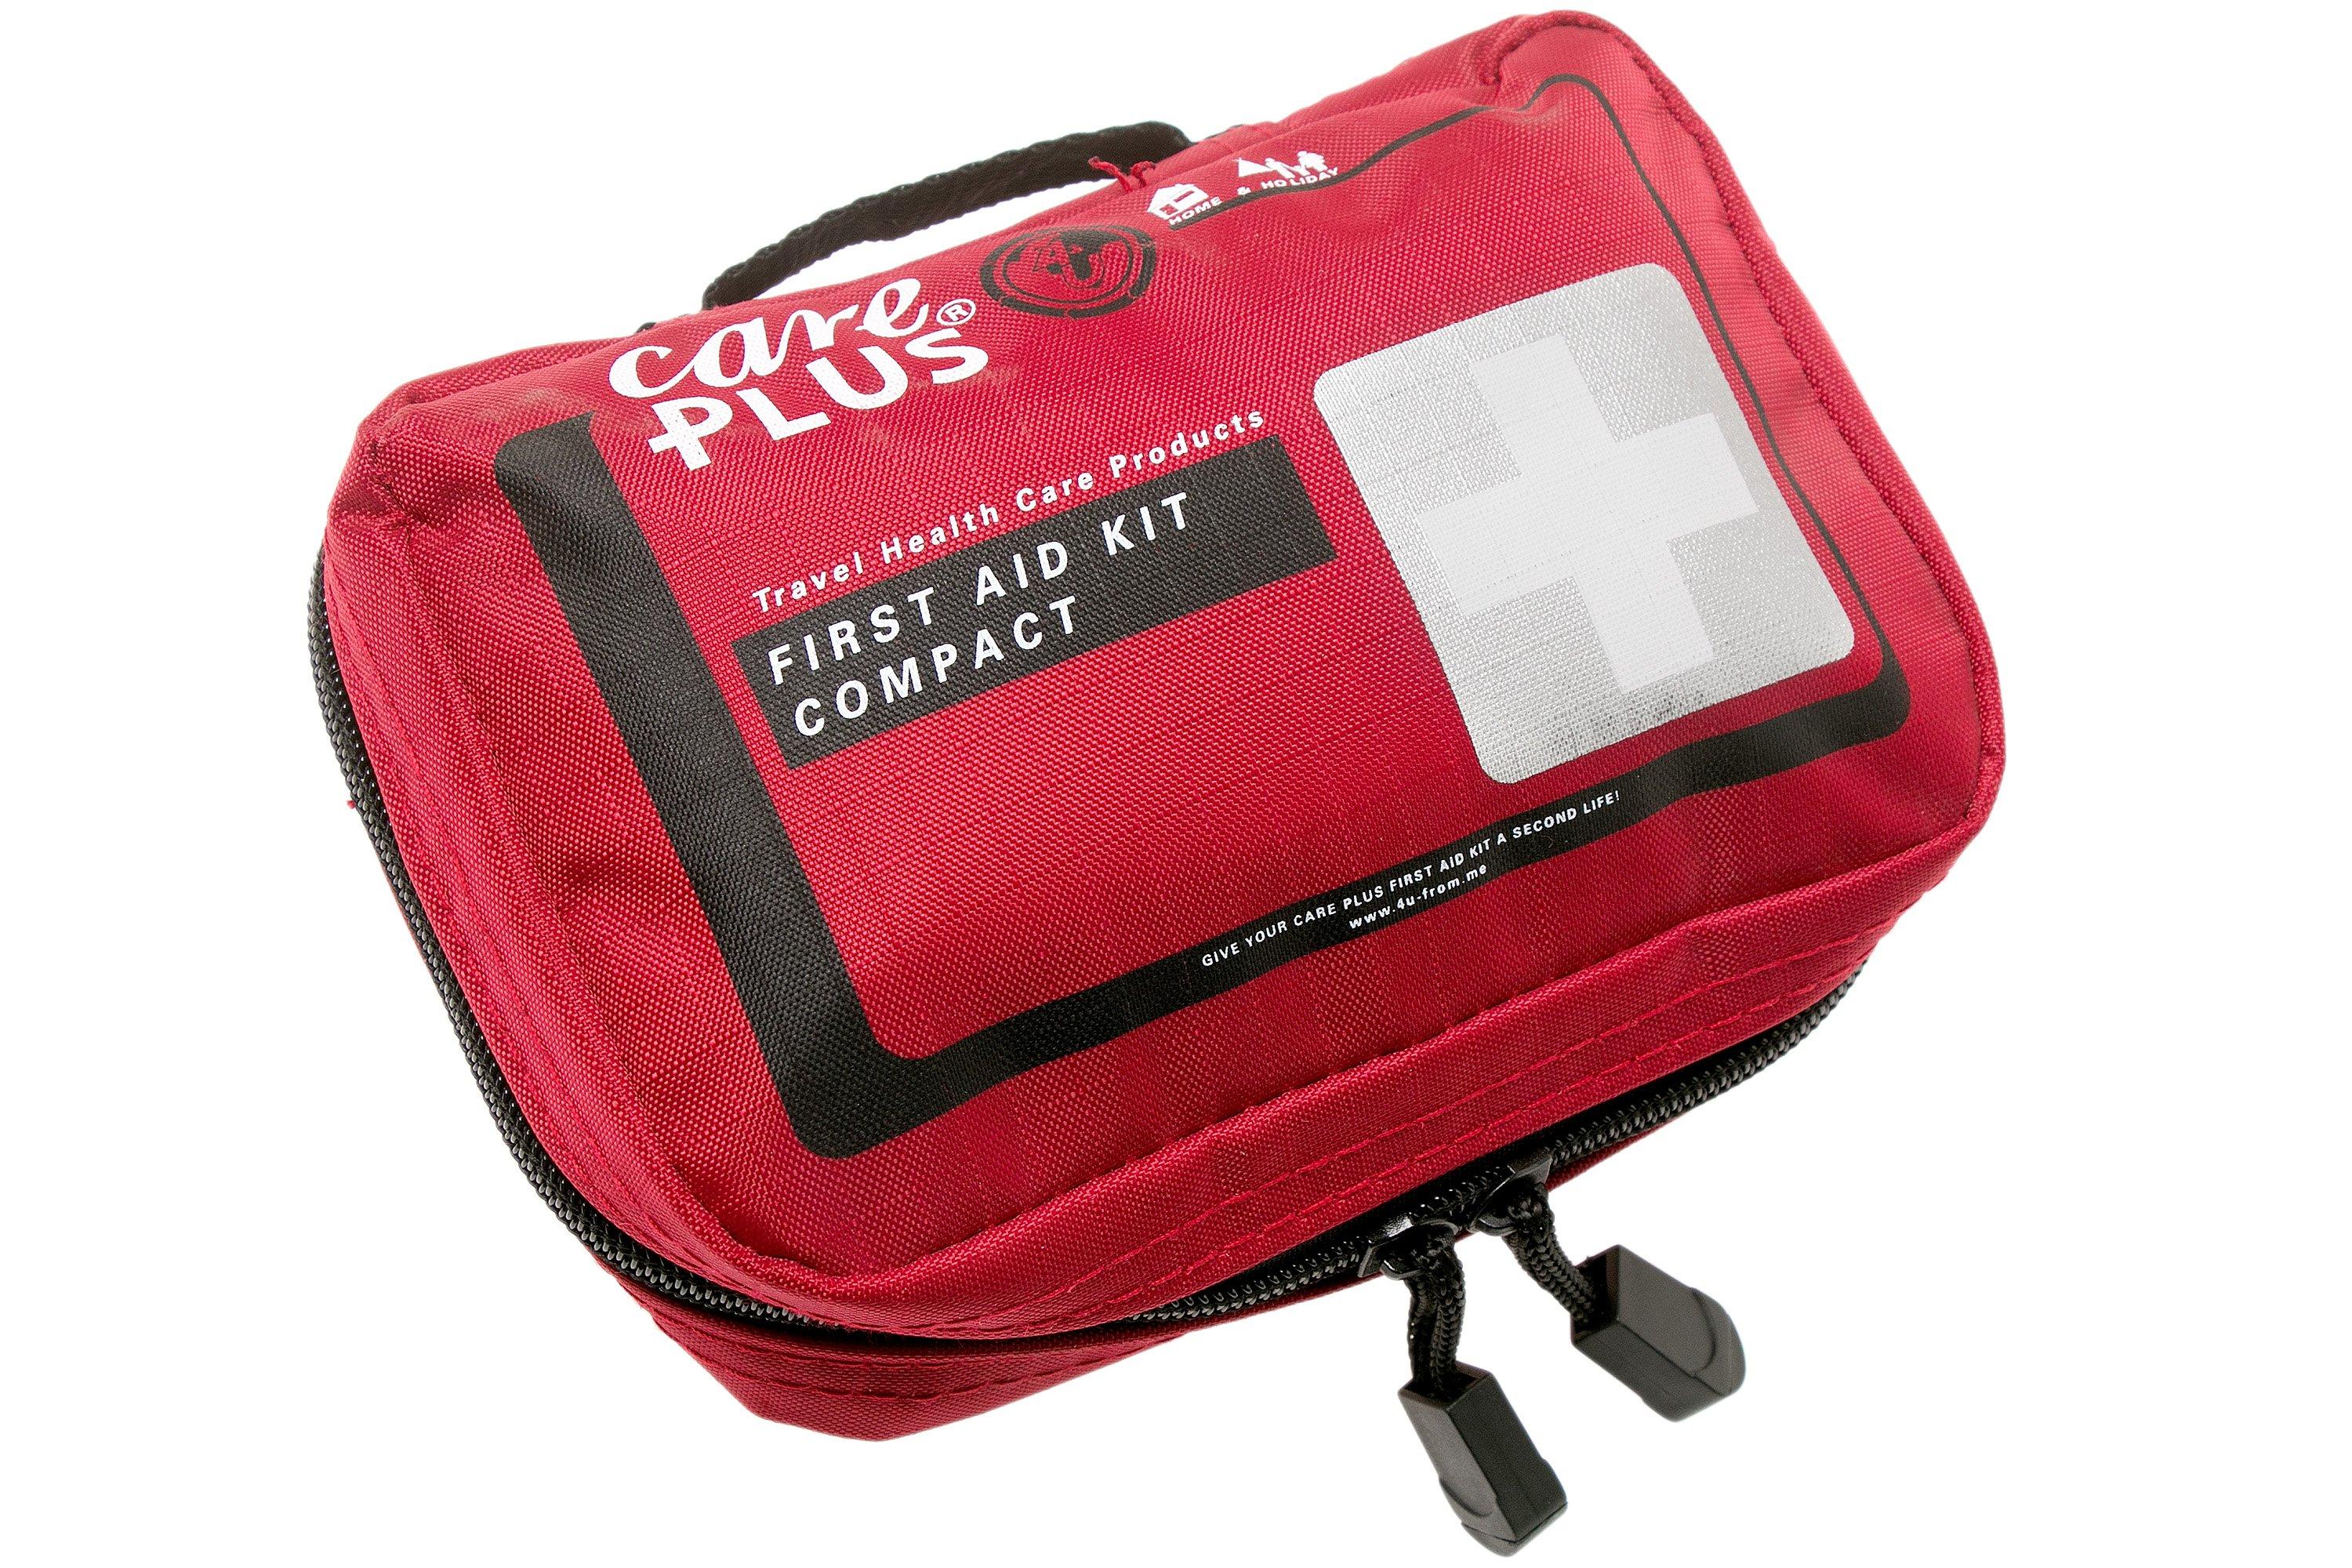 Care Plus First Aid Kit Compact, first aid kit